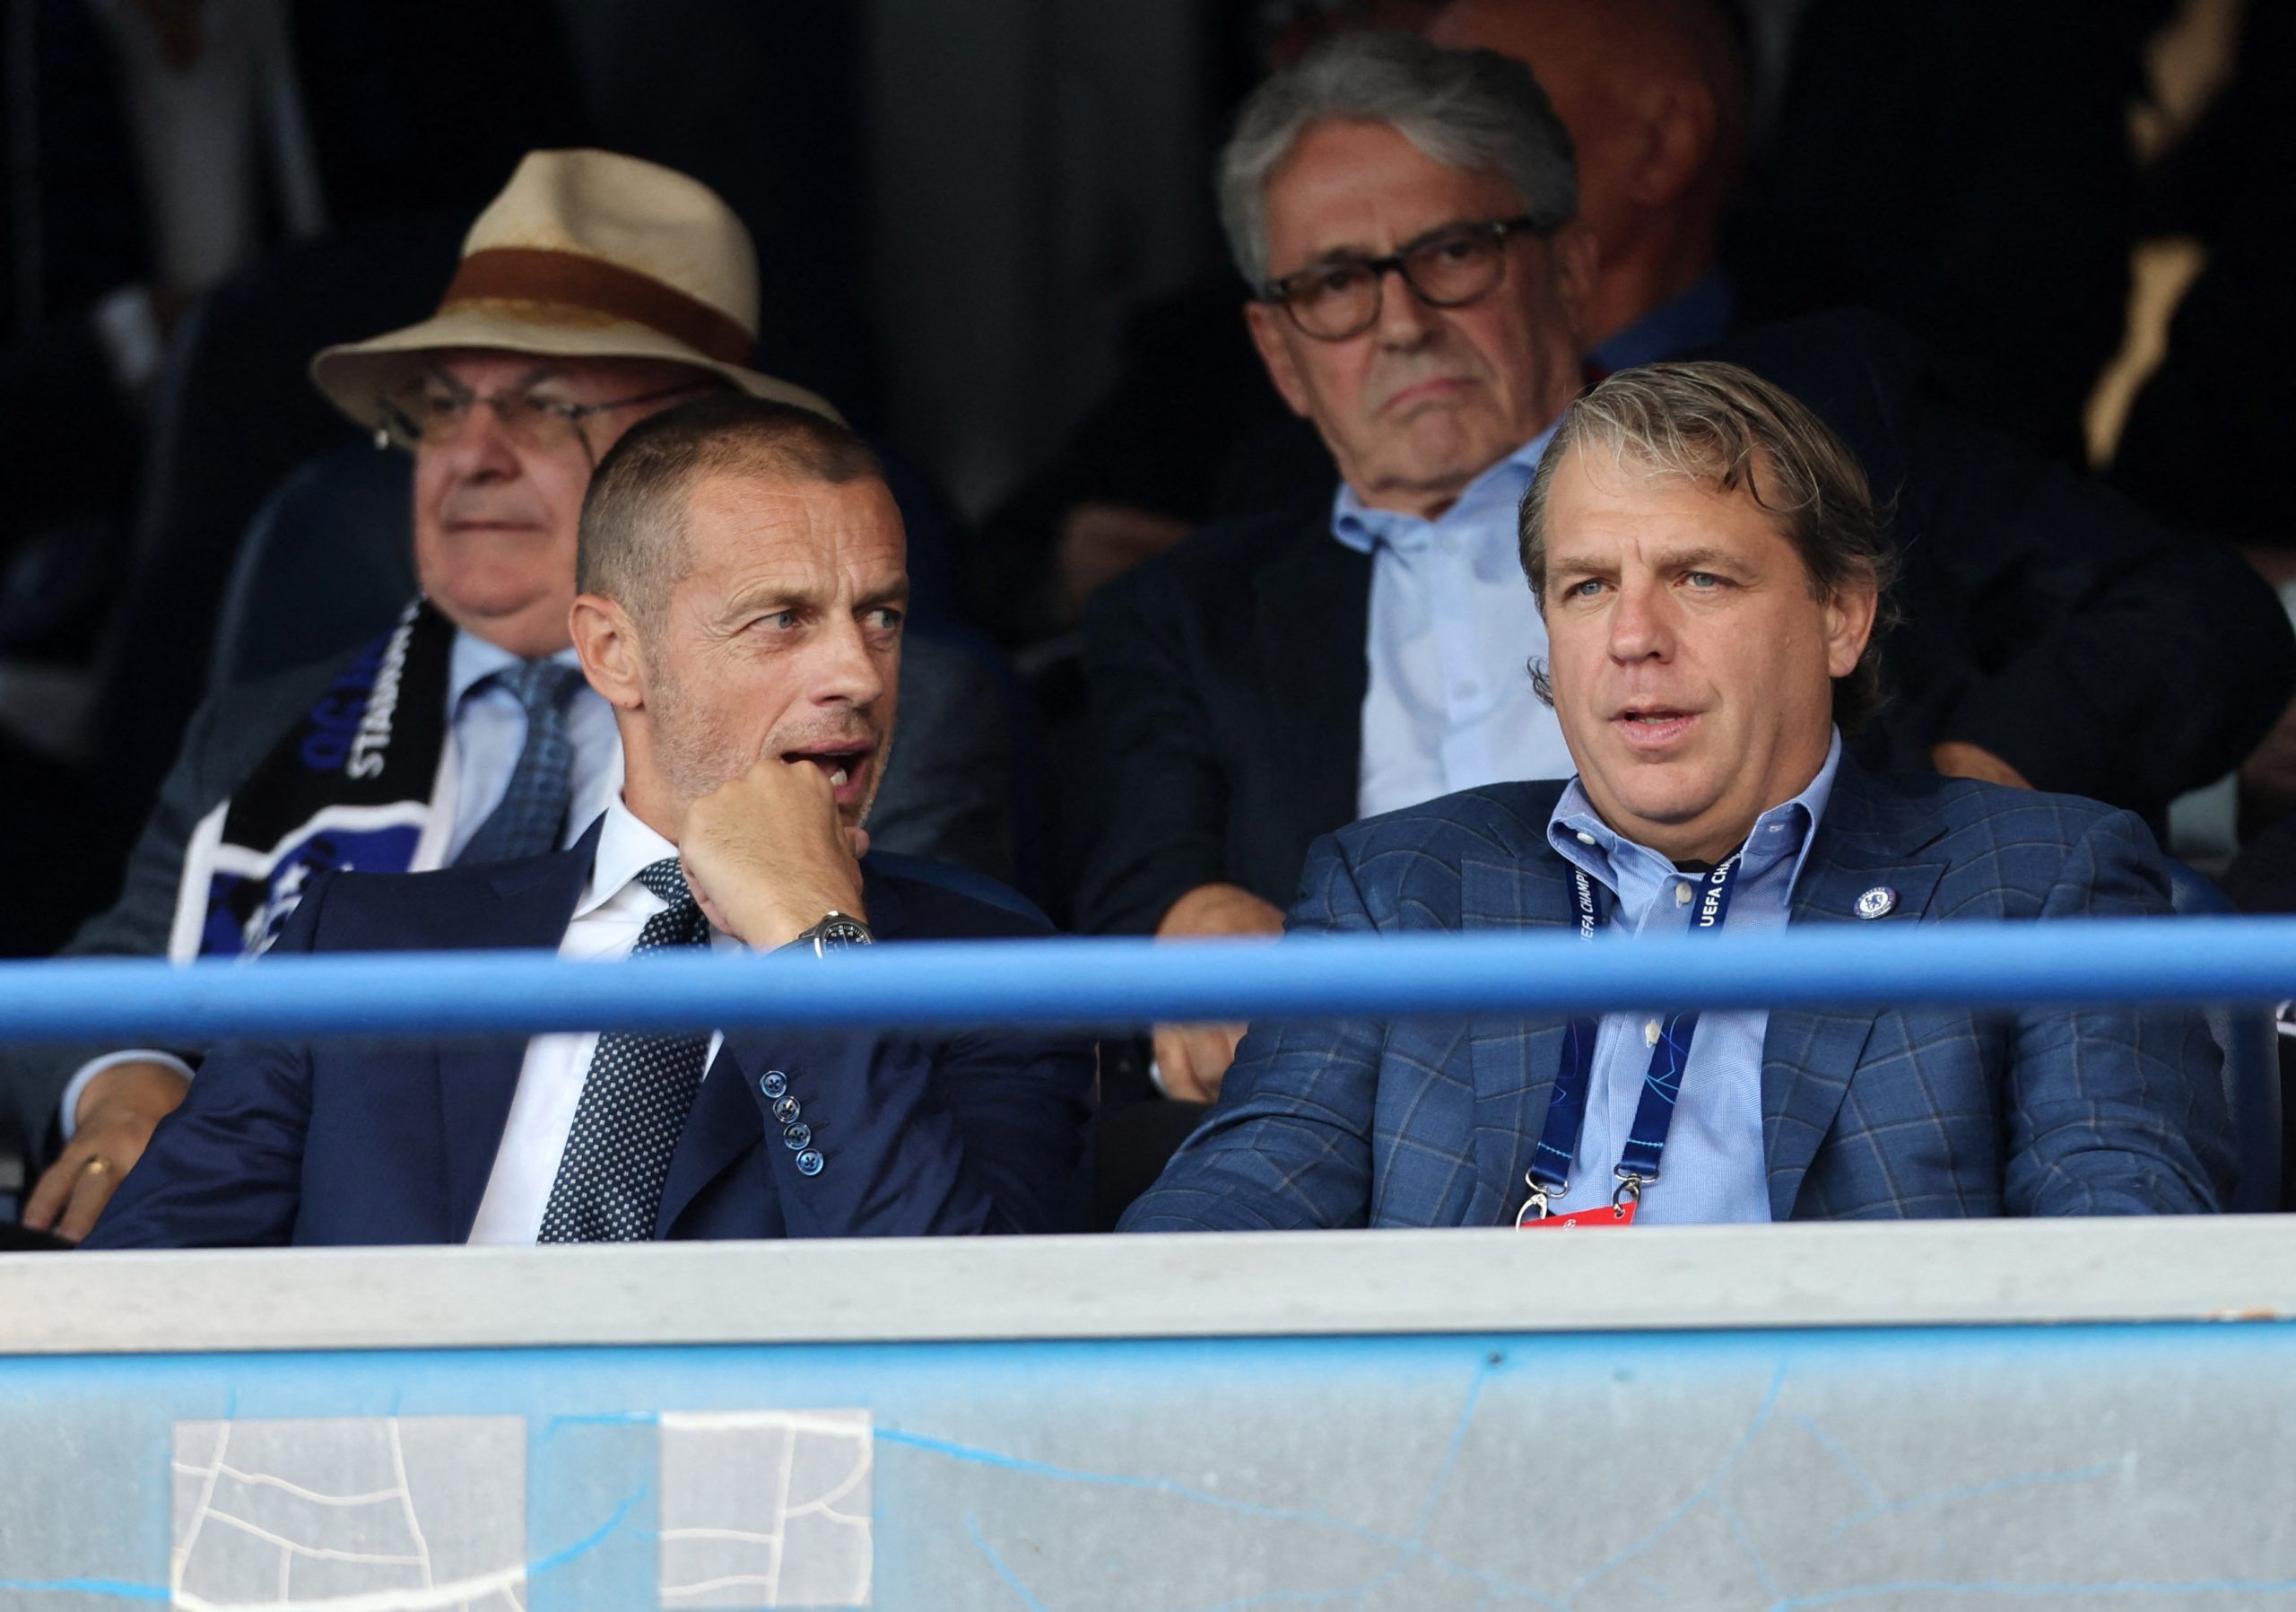 Soccer Football - Champions League - Group E - Dinamo Zagreb v Chelsea - Stadion Maksimir, Zagreb, Croatia - September 6, 2022  UEFA president Aleksander Ceferin with Chelsea owner Todd Boehly in the stands before the match REUTERS/Antonio Bronic